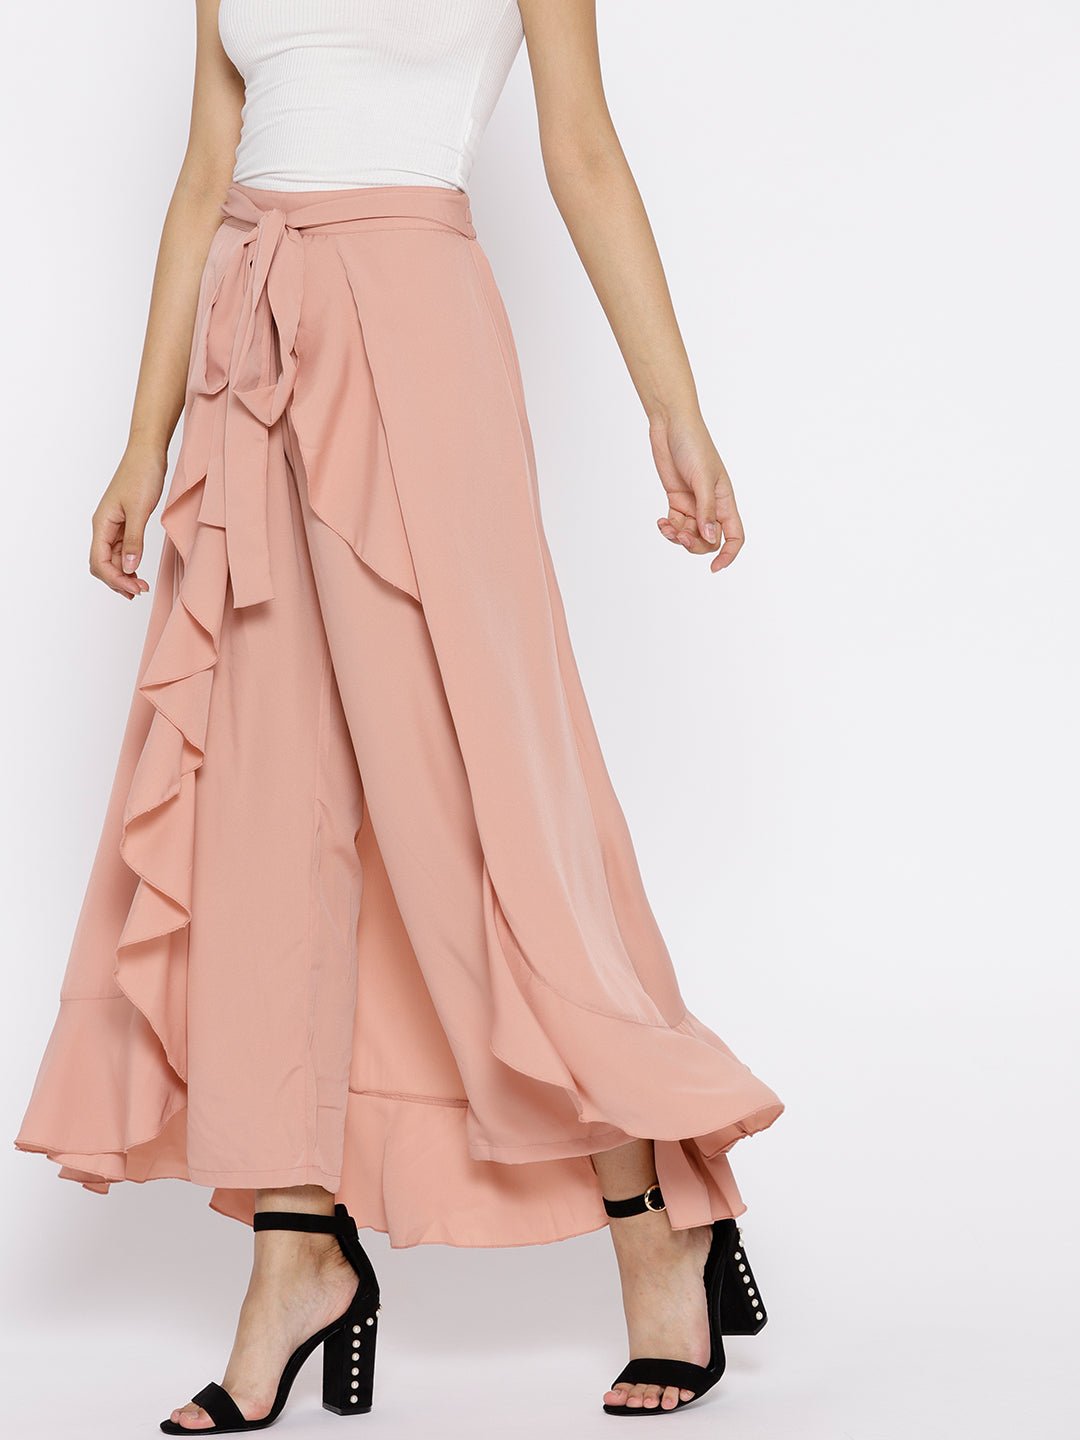 Folk Republic Women Solid Dusty Pink Waist Tie-Up Ruffled Maxi Skirt with Attached Trousers - #folk republic#